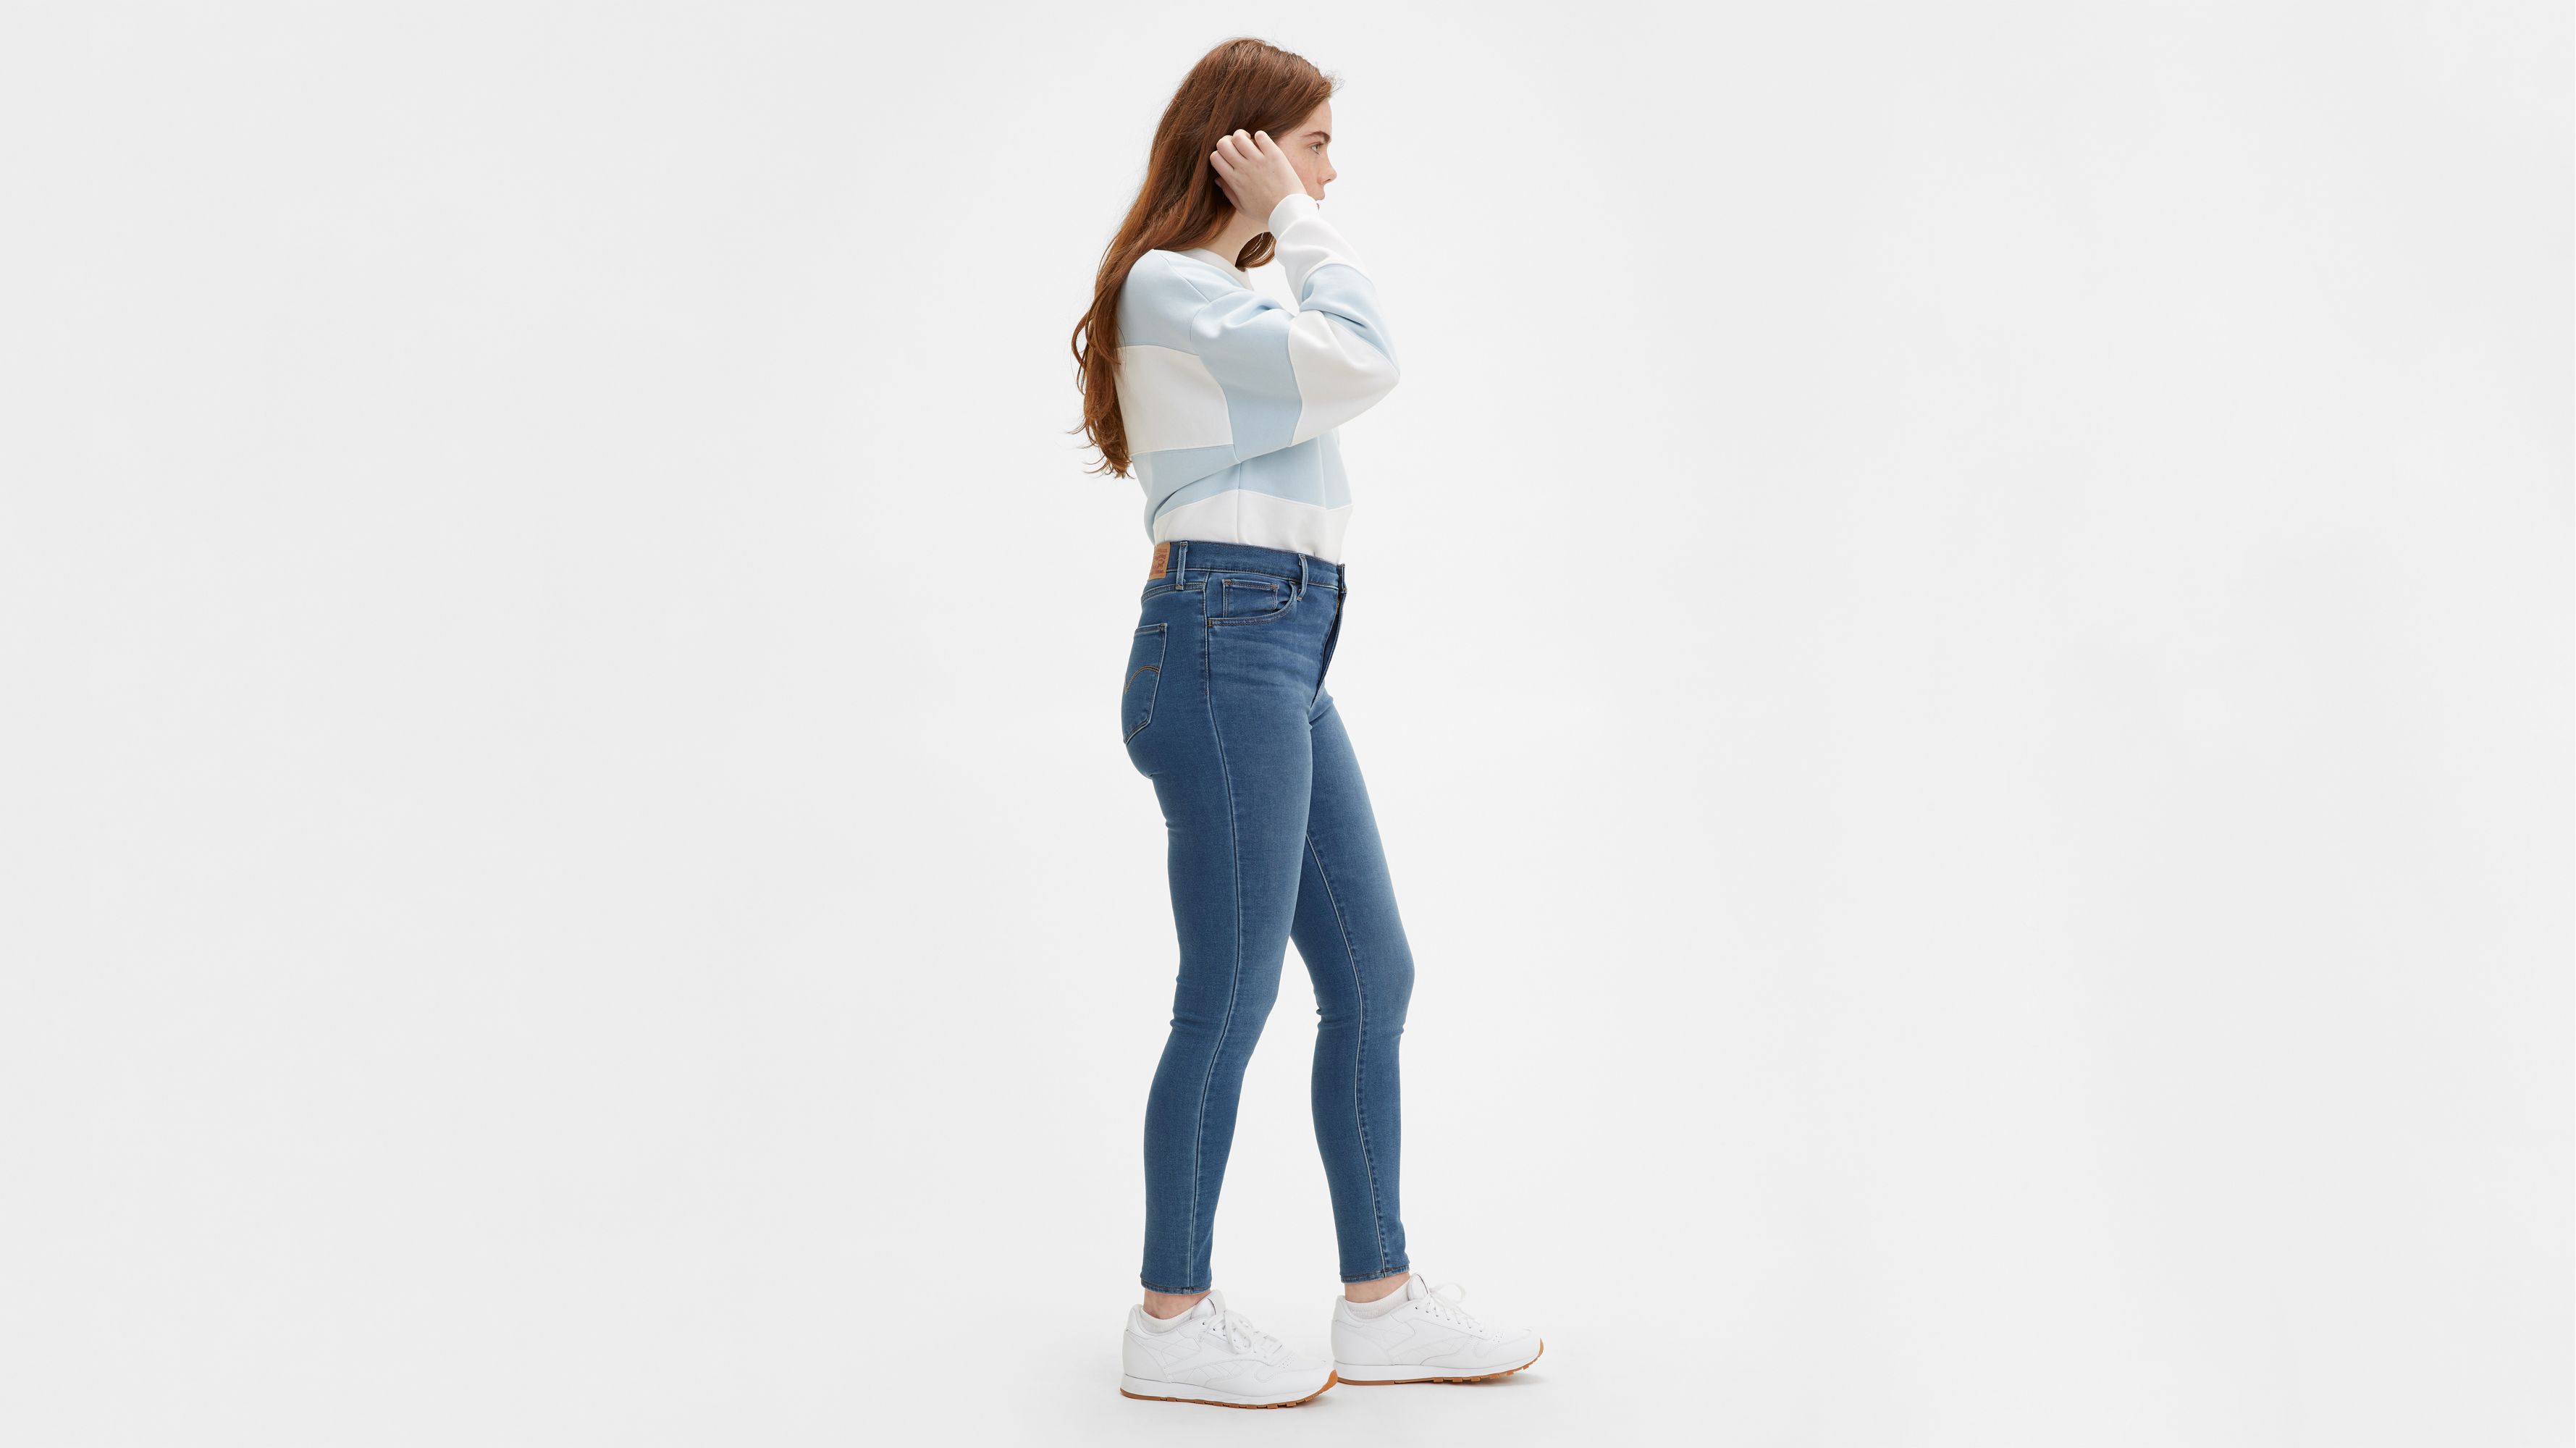 LEVIS Jeans Mujer 720 High-Rise Super Skinny Azul Levis